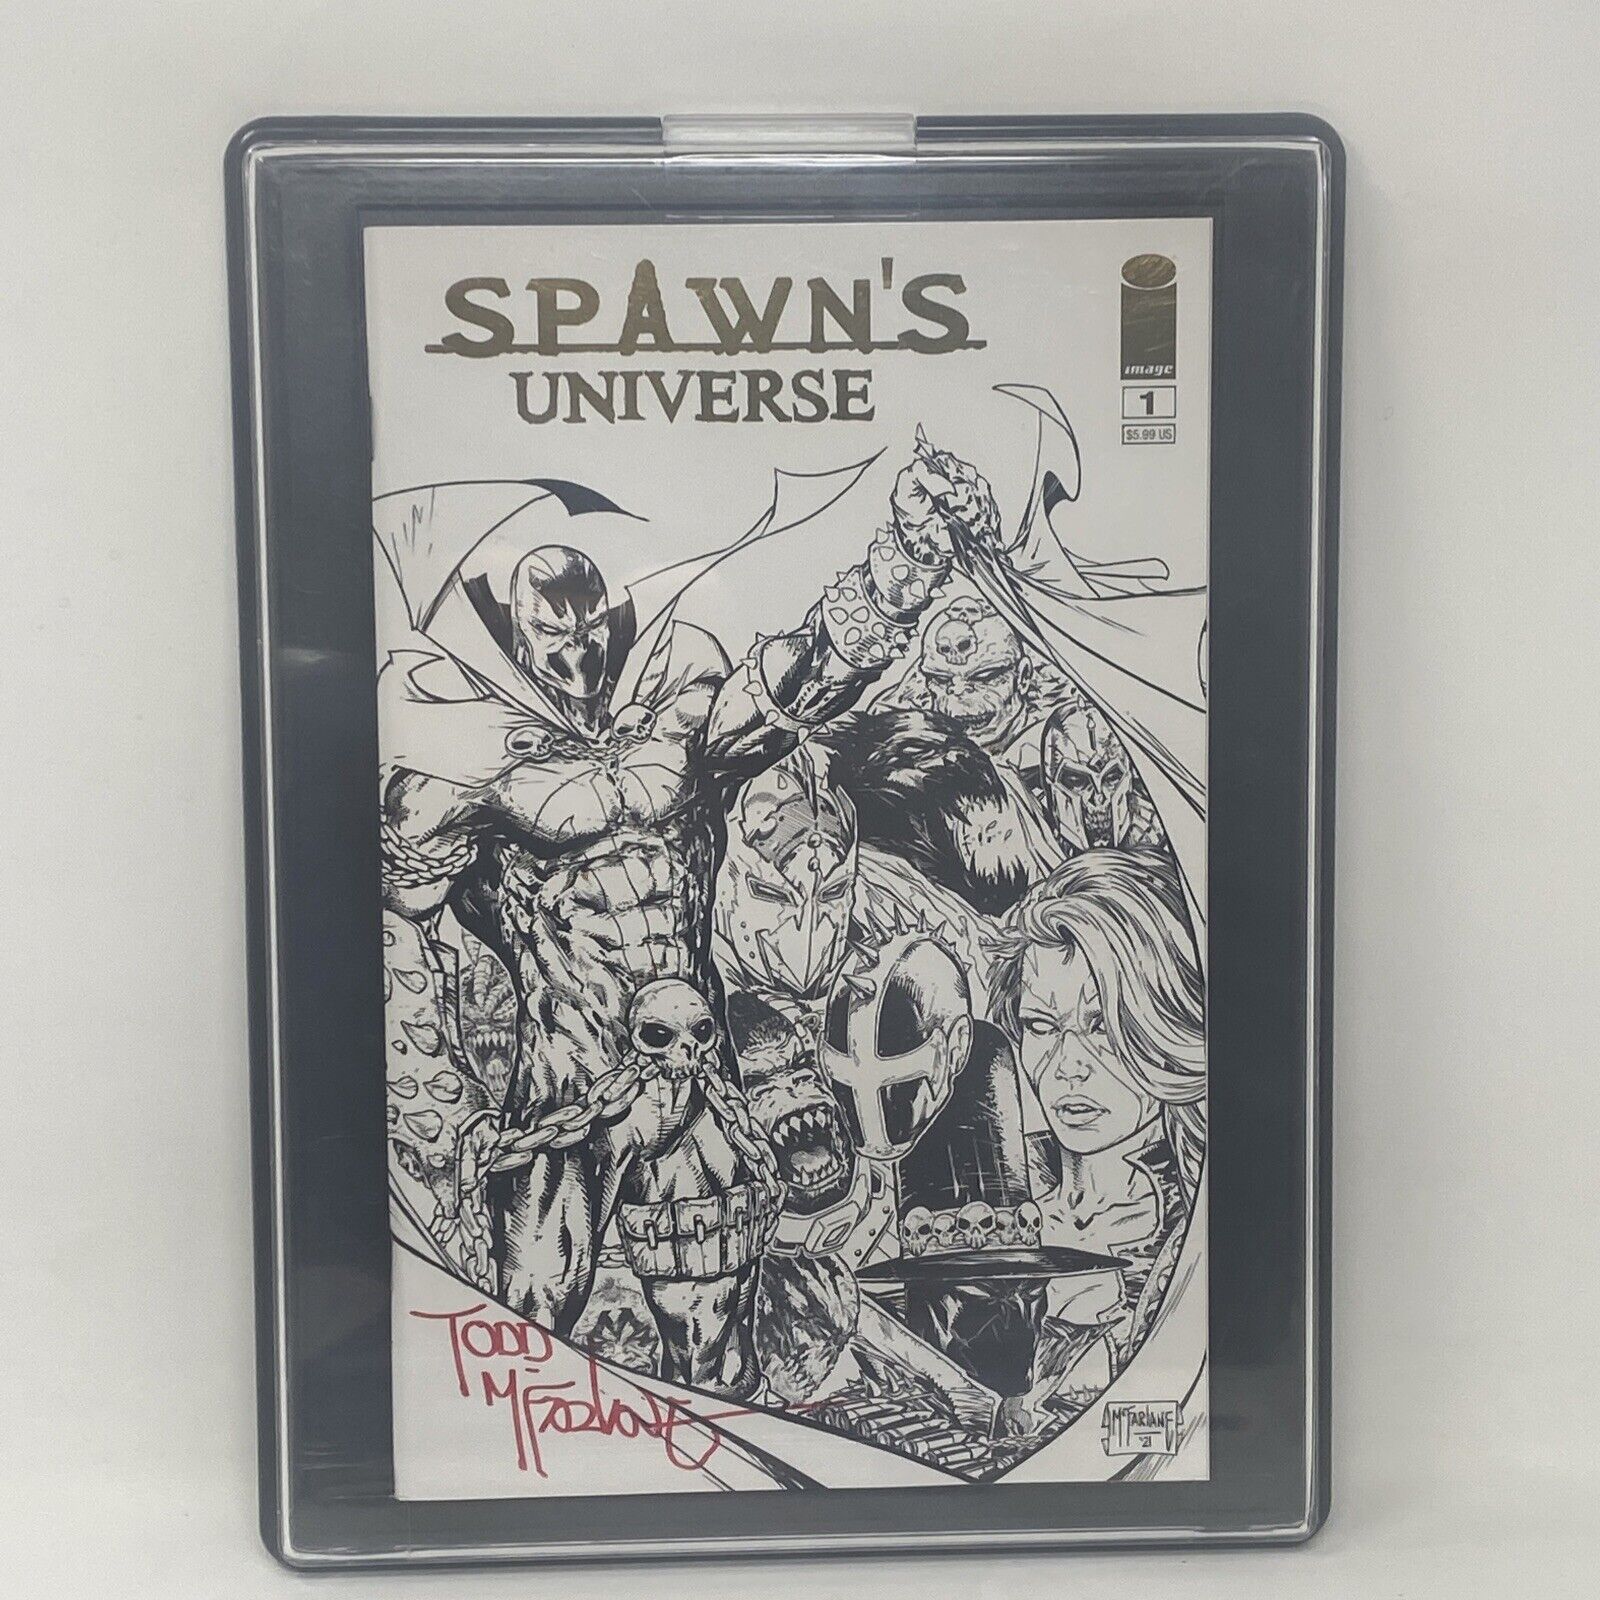 Spawn’s Universe #1 - McFarlane Toys Exclusive Gold Foil - Signed Todd McFarlane